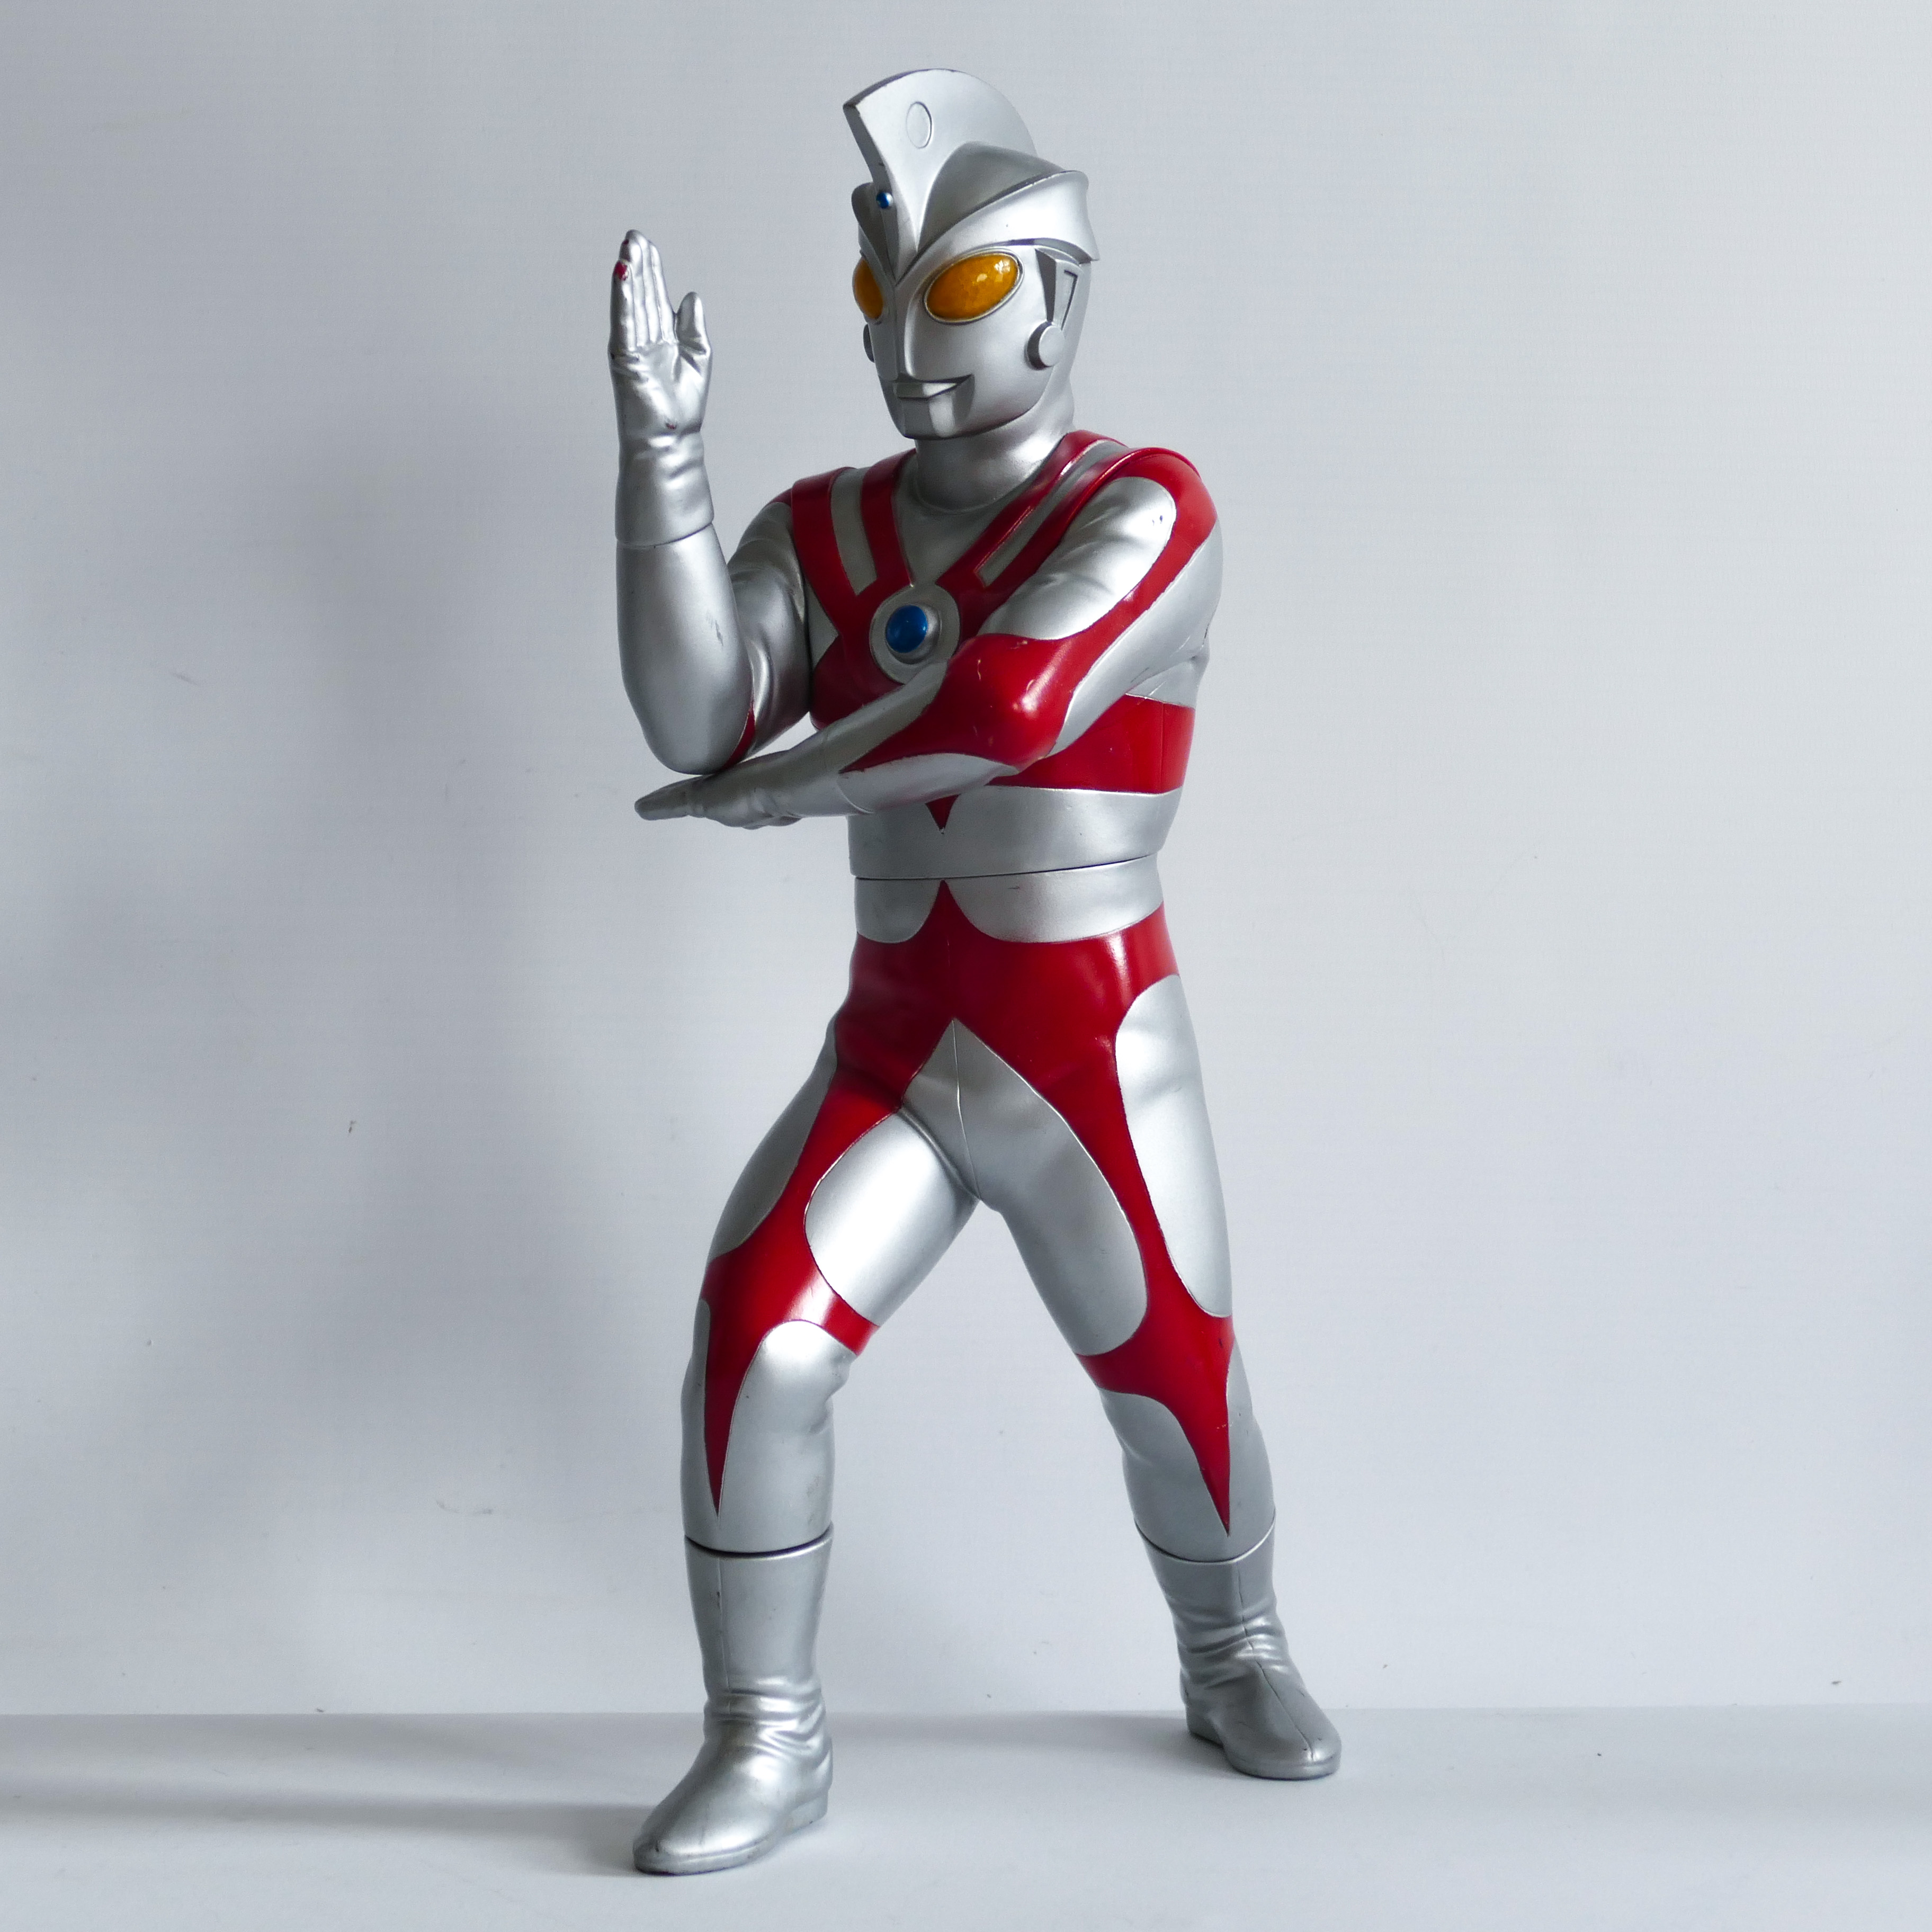 LARGE ULTRAMAN ACE STORE DISPLAY ACTION FIGURE 2002 BANPRESTO. JAPANESE SCIENCE FICTION TOY